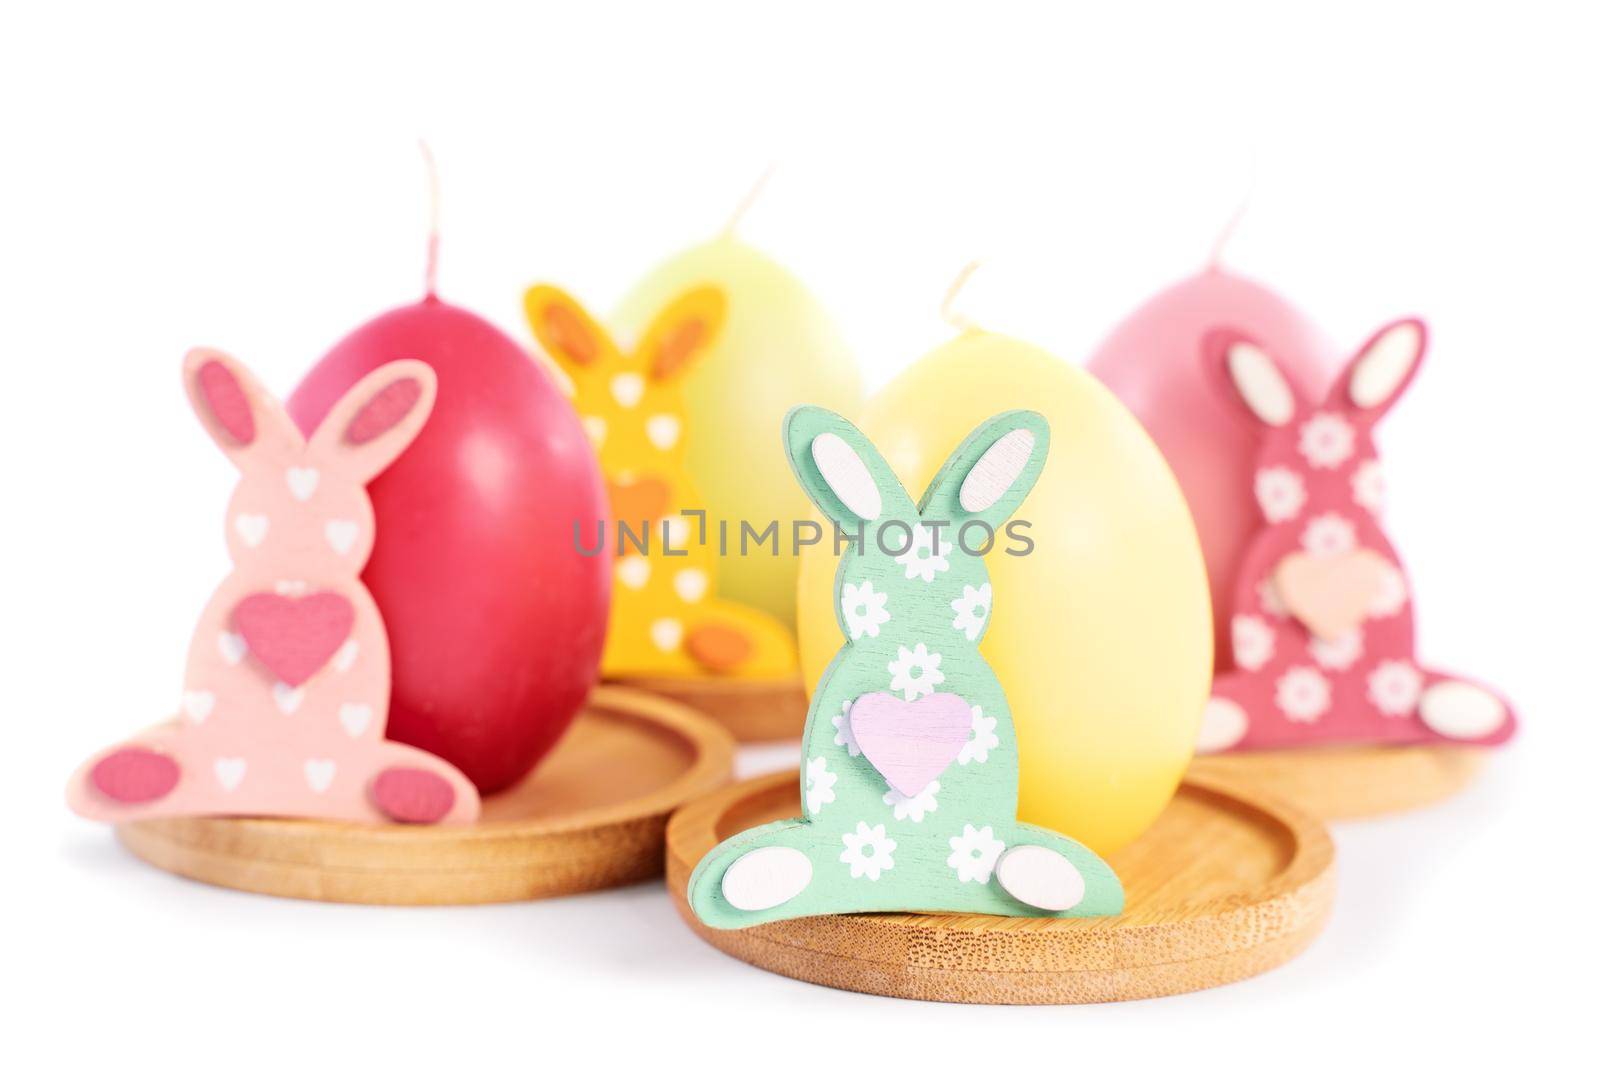 Close up of small Easter Bunnies next to egg shaped candles in pastel colors, isolated on white background. Fun and colorful Easter celebration concept.